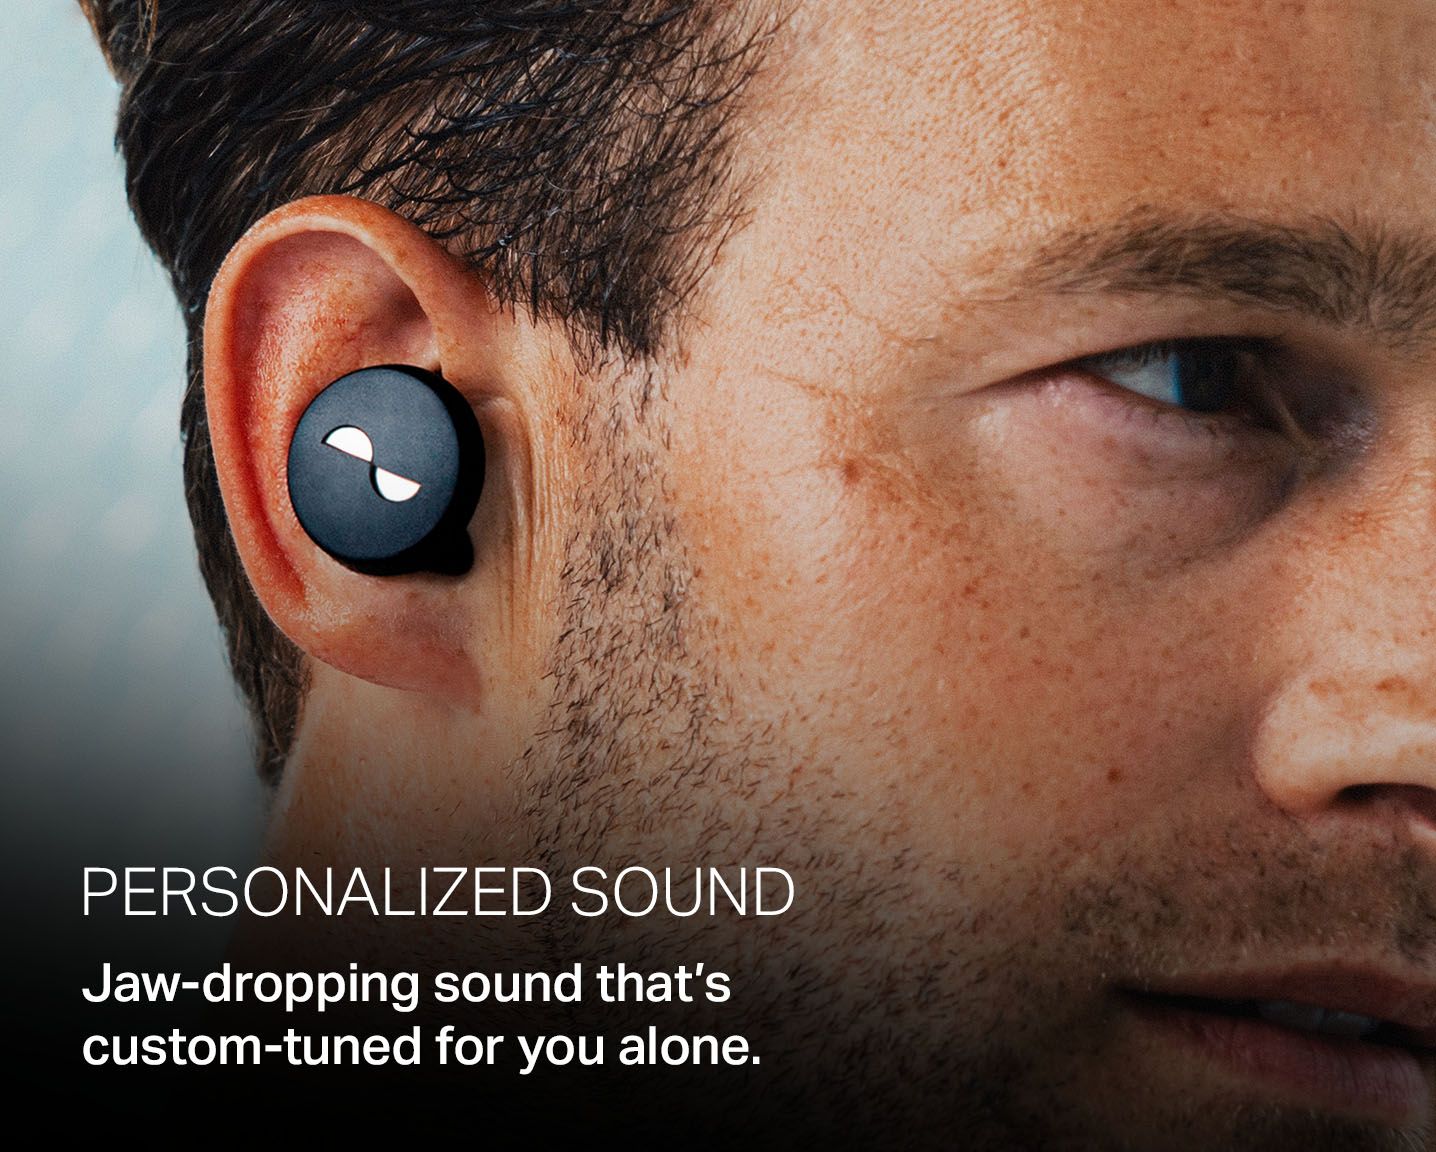 Person wearing the NURATRUE earbuds in ears, with overlay text: "Personalized sound. Jaw-dropping sound that's custom-tuned for you alone."